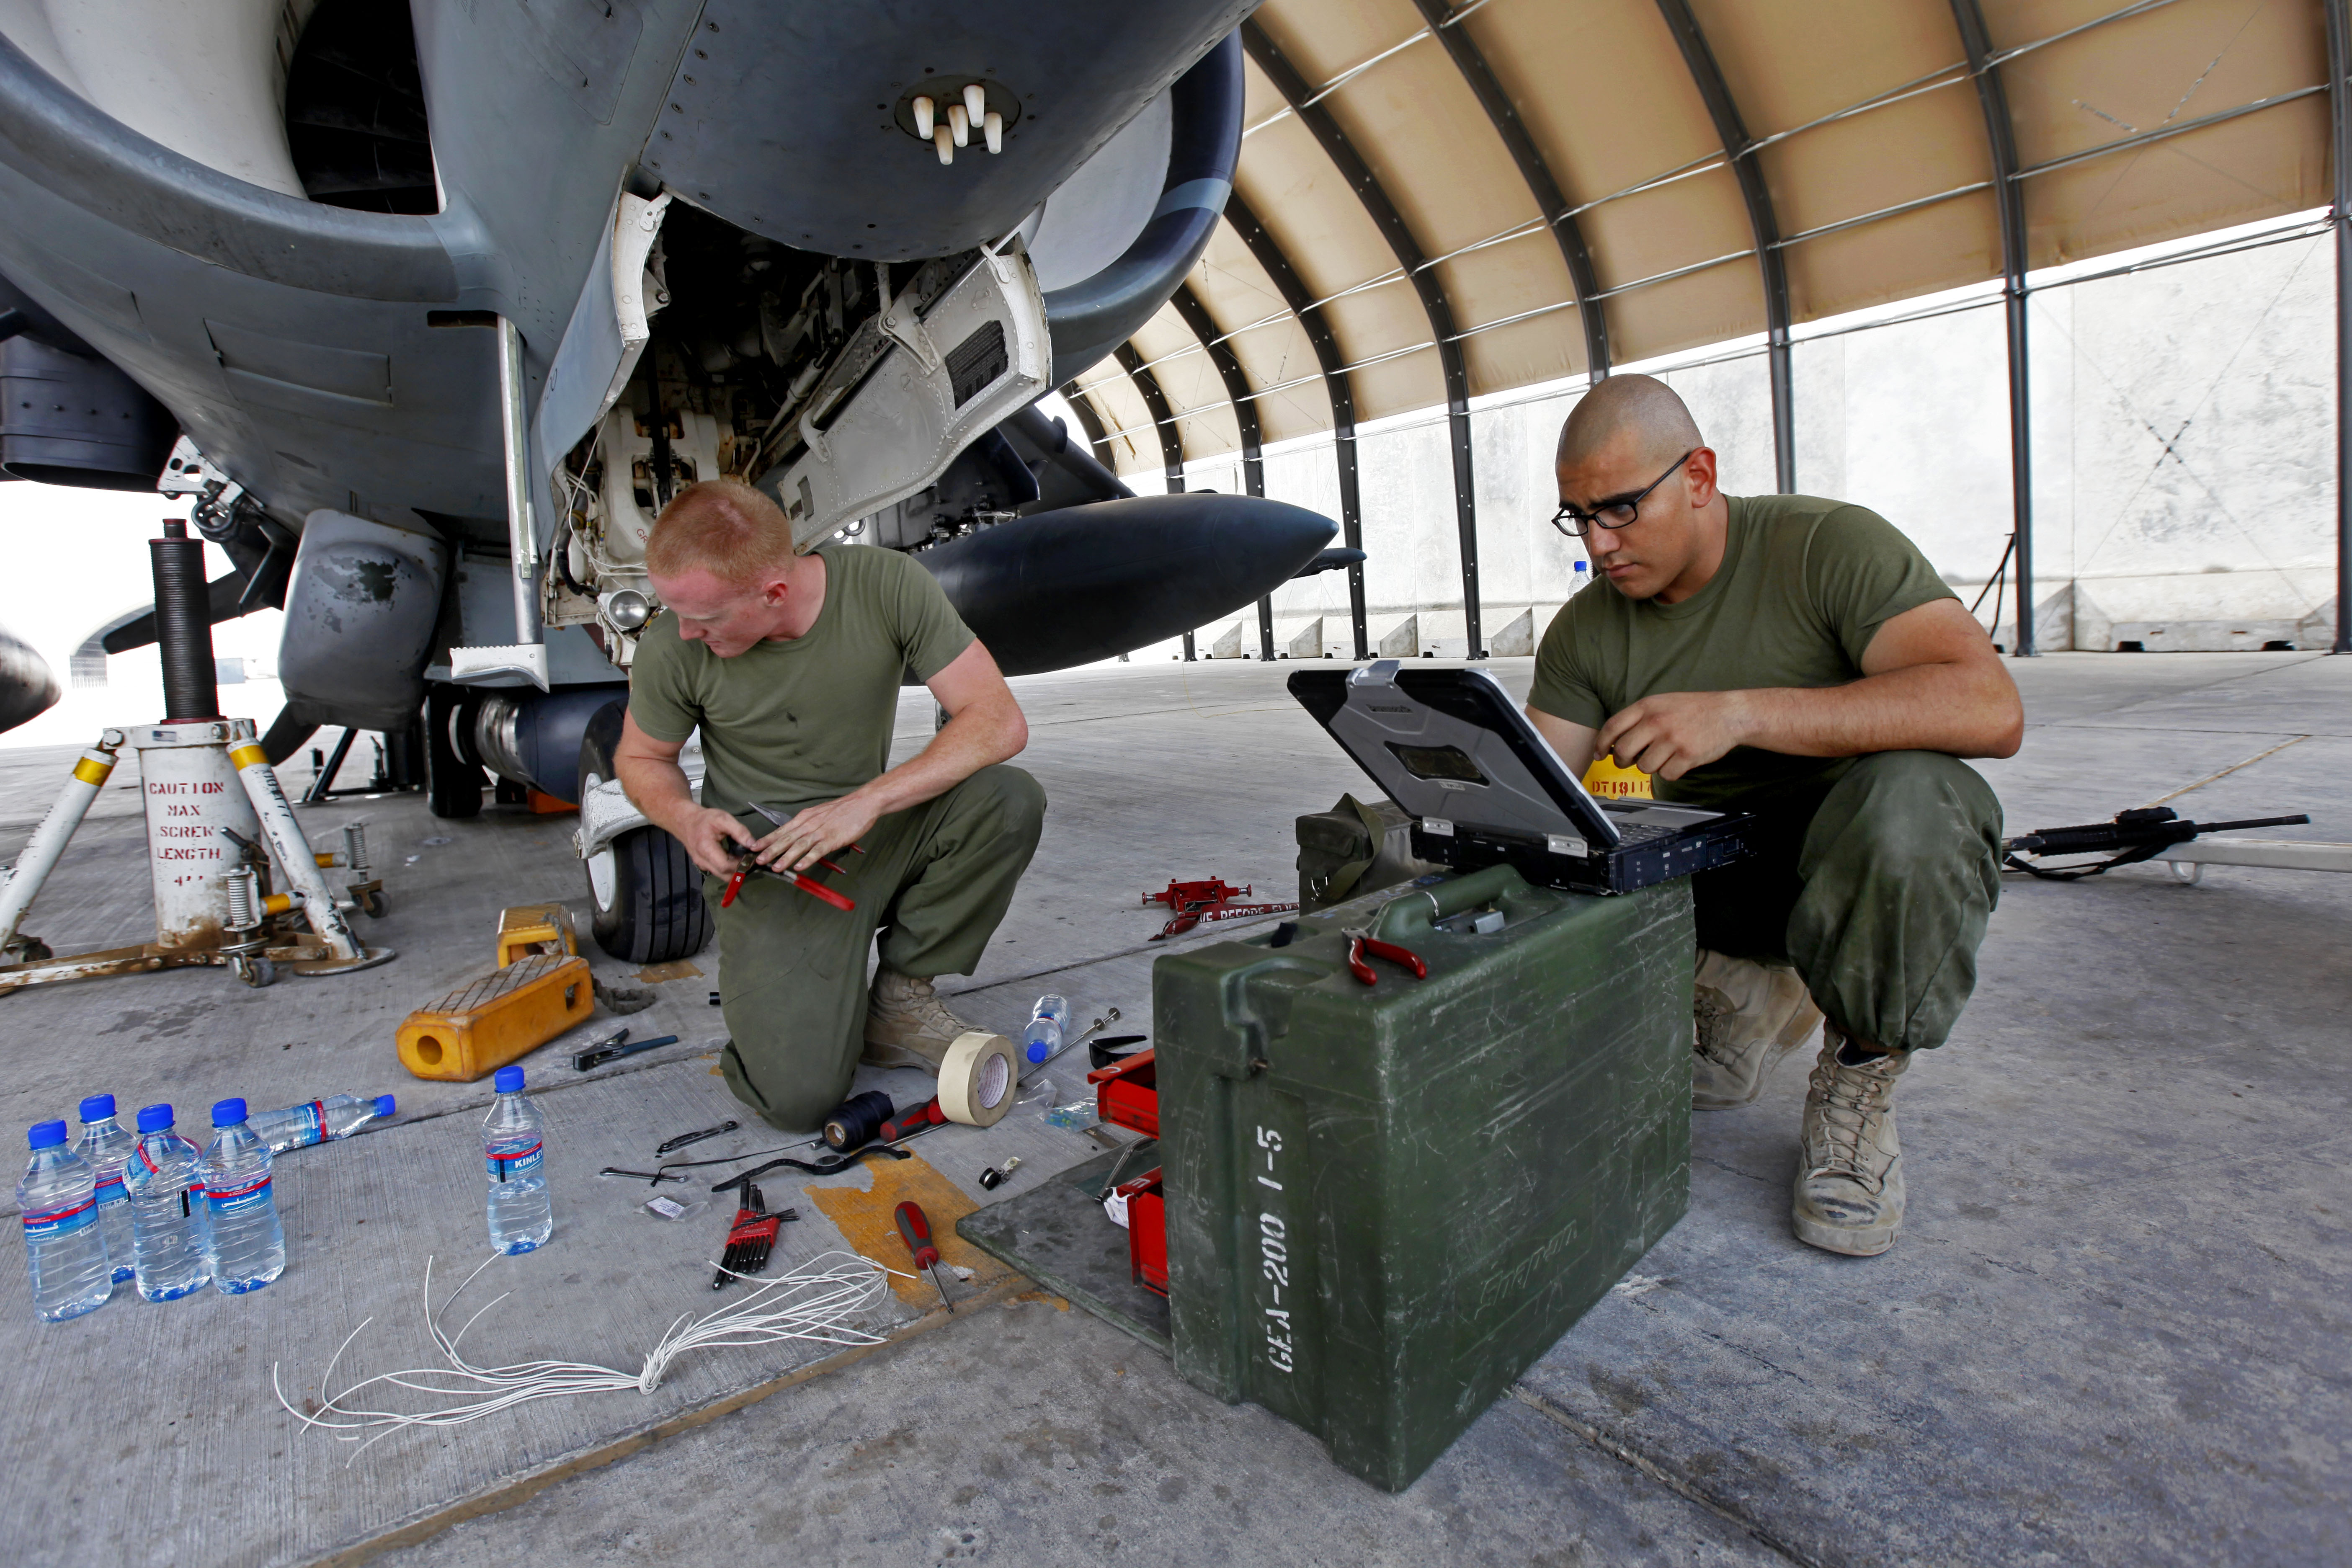 U.S. Marines Lance Cpl. Jason D. Launder, left, an avionics technician and Cpl. Noe L. Munoz, a collateral duty inspector, both with Marine Attack Squadron 311, troubleshoot and replace the landing gear system on an AV-8B Harrier. US Marine Corps Photo